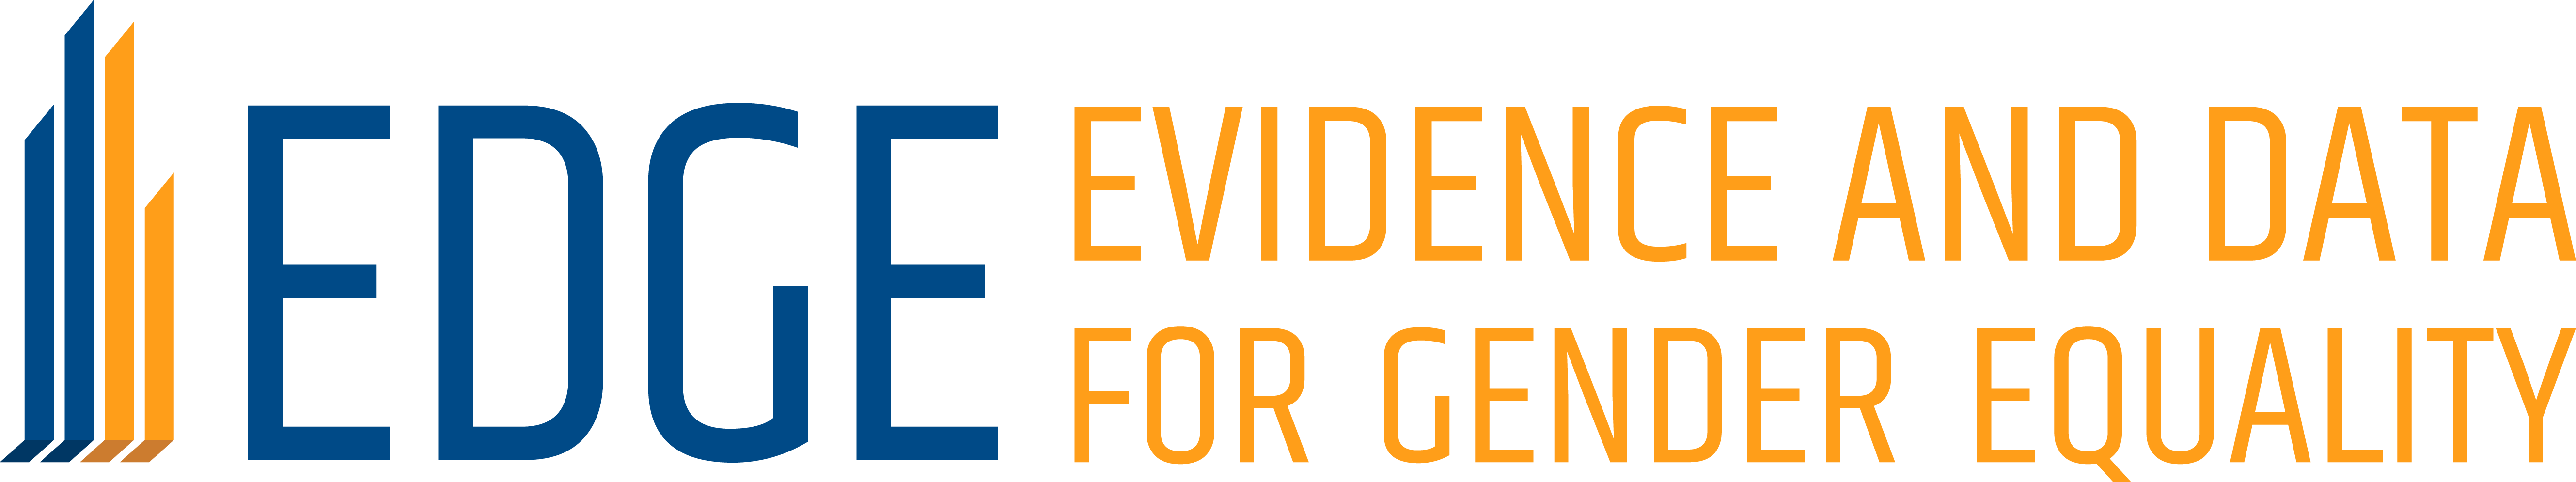 Evidence and Data for Gender Equality